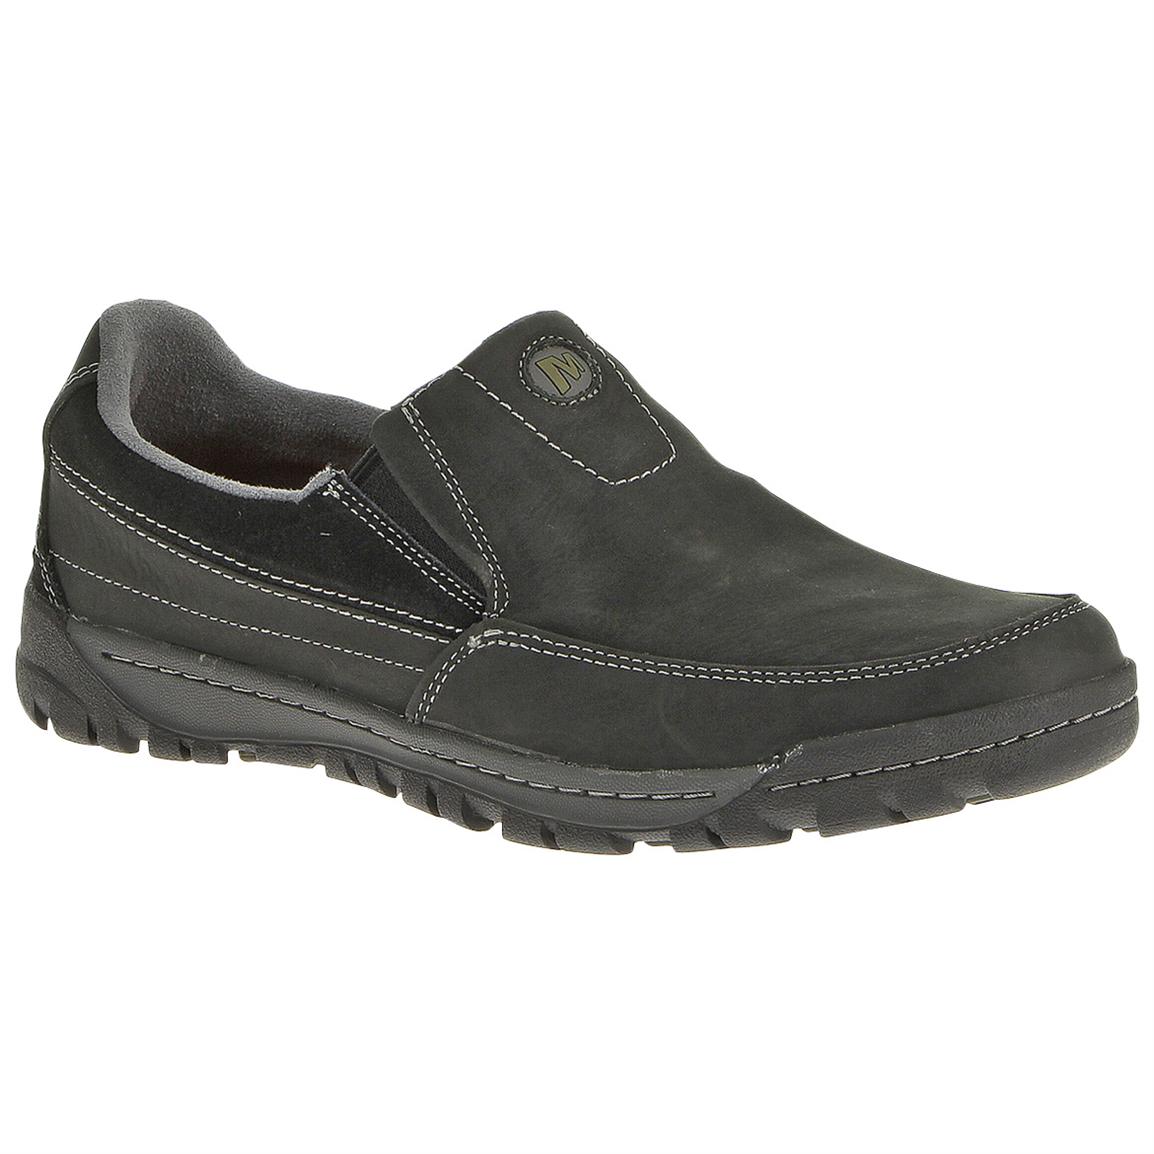 Men's Merrell® Traveler Rove Slip-on Shoes - 591220, Casual Shoes at ...